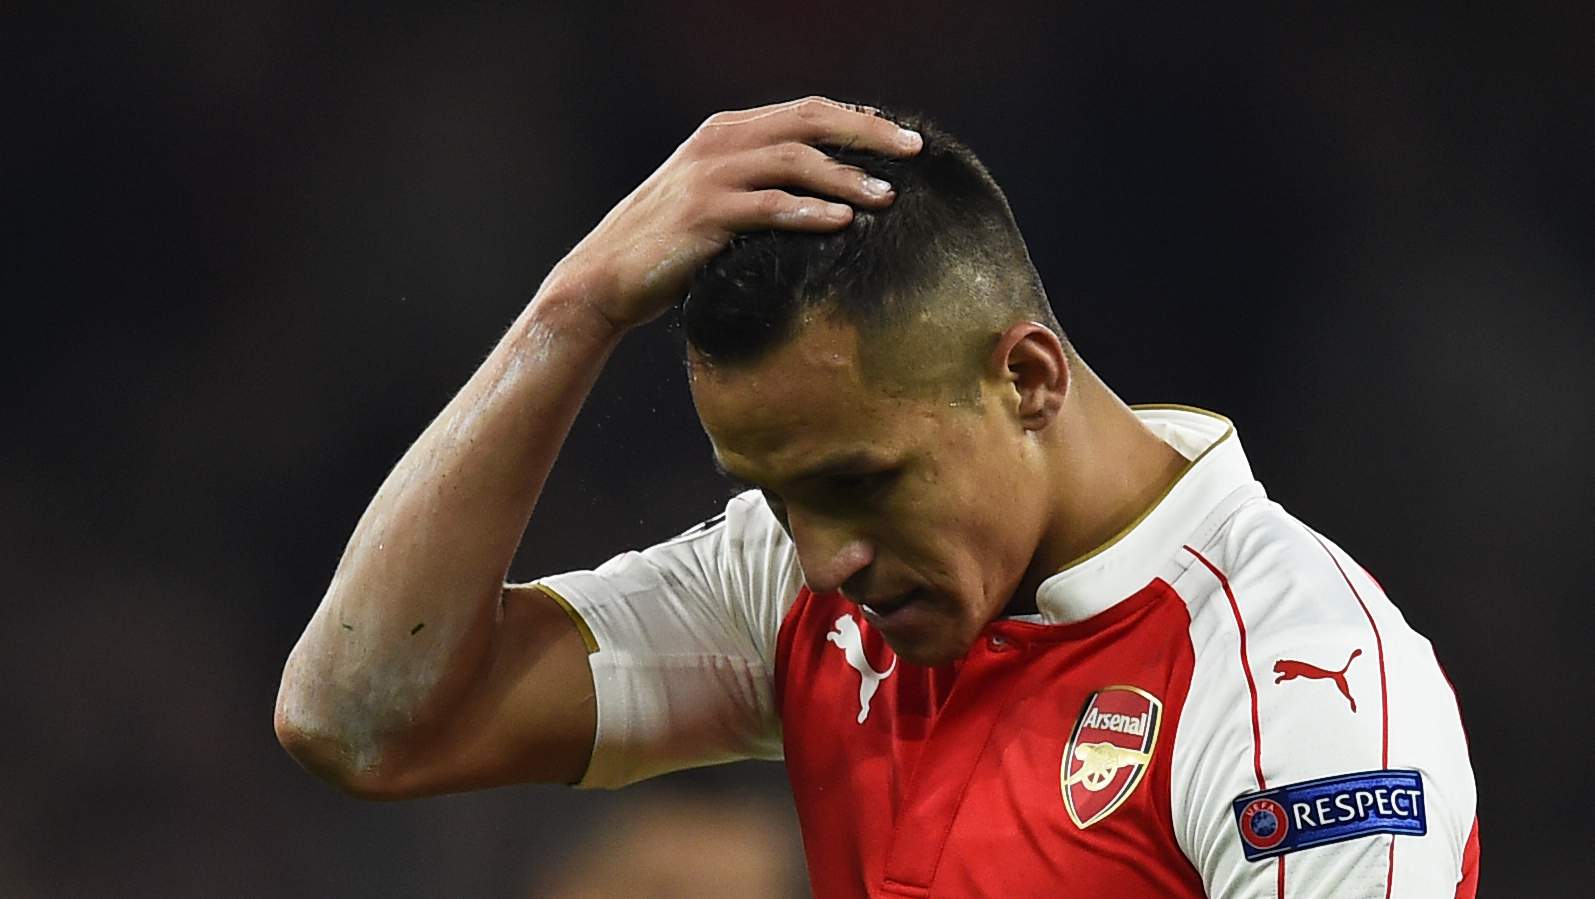 Football - Arsenal v Bayern Munich - UEFA Champions League Group Stage - Group F - Emirates Stadium, London, England - 20/10/15 Arsenal's Alexis Sanchez looks dejected Reuters / Dylan Martinez Livepic EDITORIAL USE ONLY.